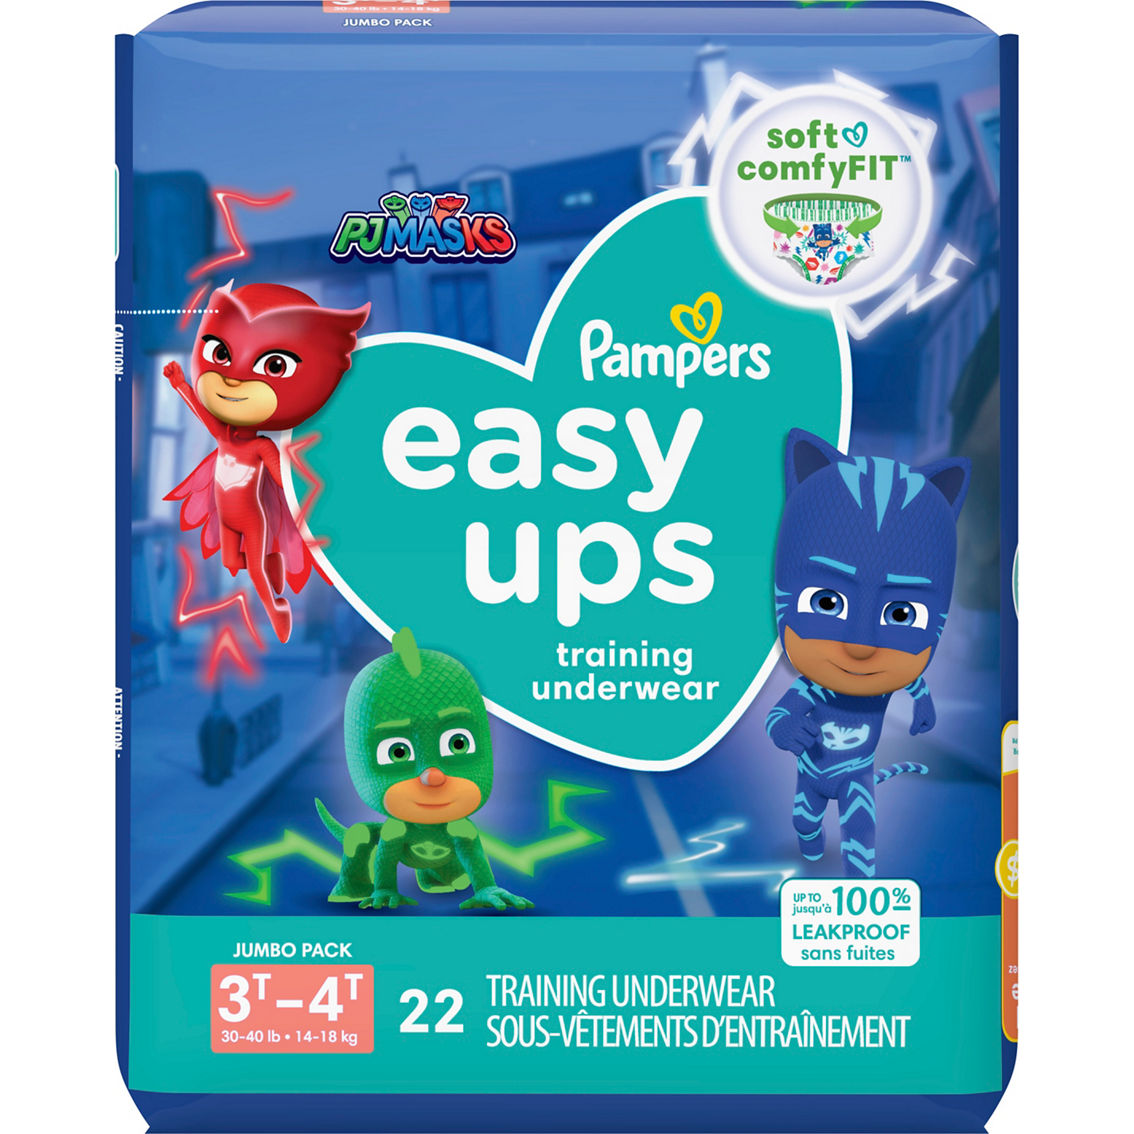 Pampers Boys Easy Ups Training Underwear Size 3t-4t (30-40 Lb.) 66 Ct., Potty Training, Baby & Toys